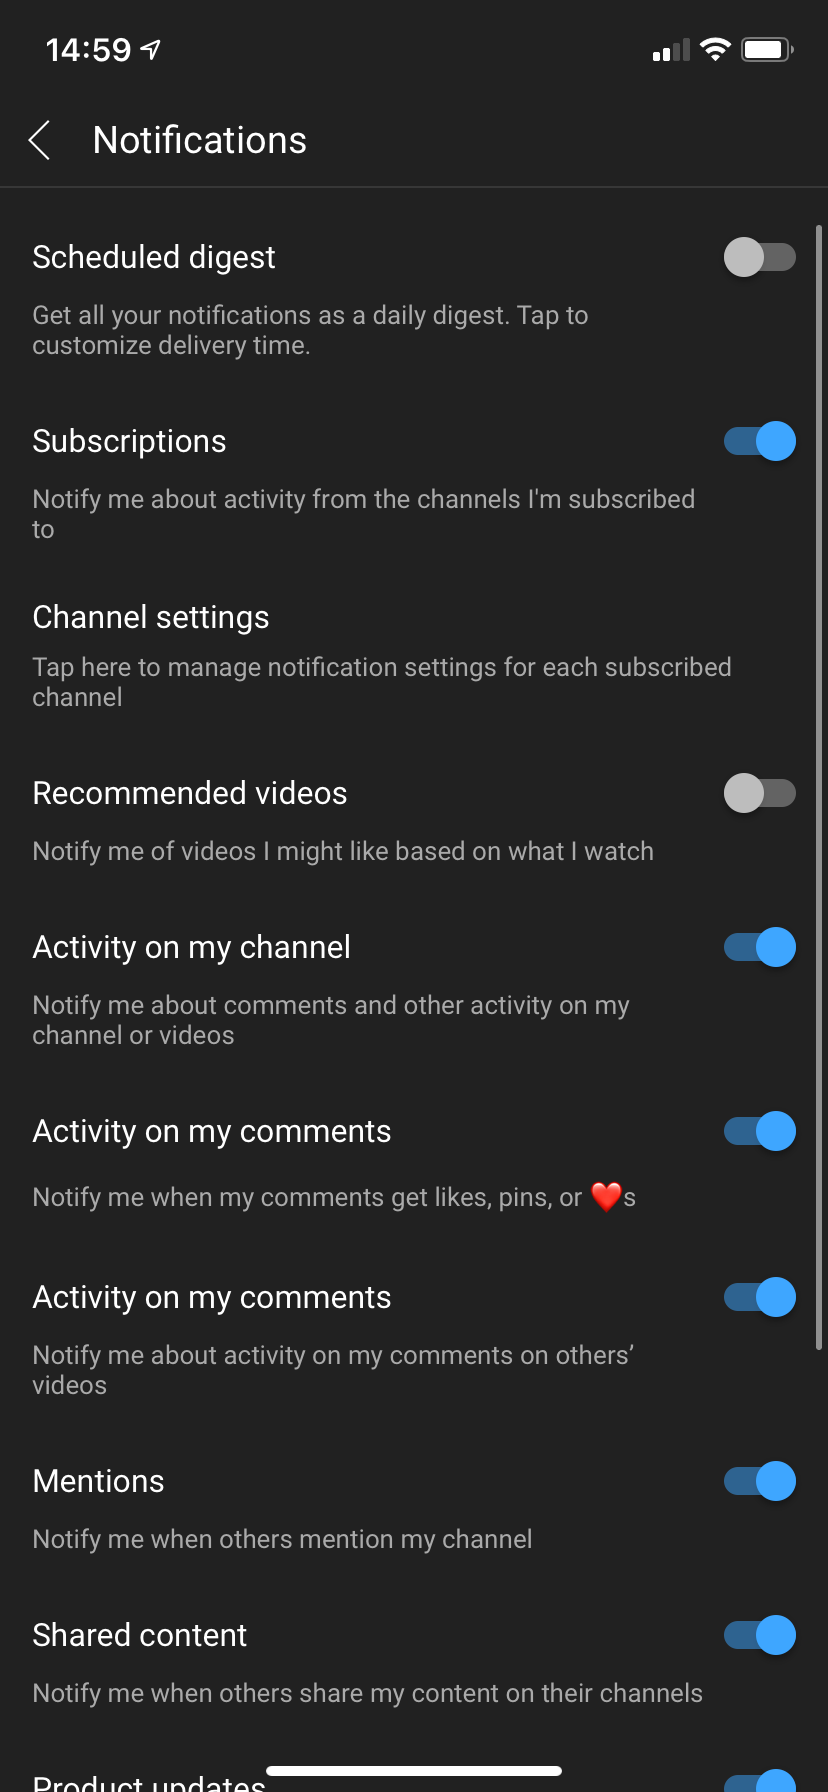 is there any way to search your subscribed channels for a particular video